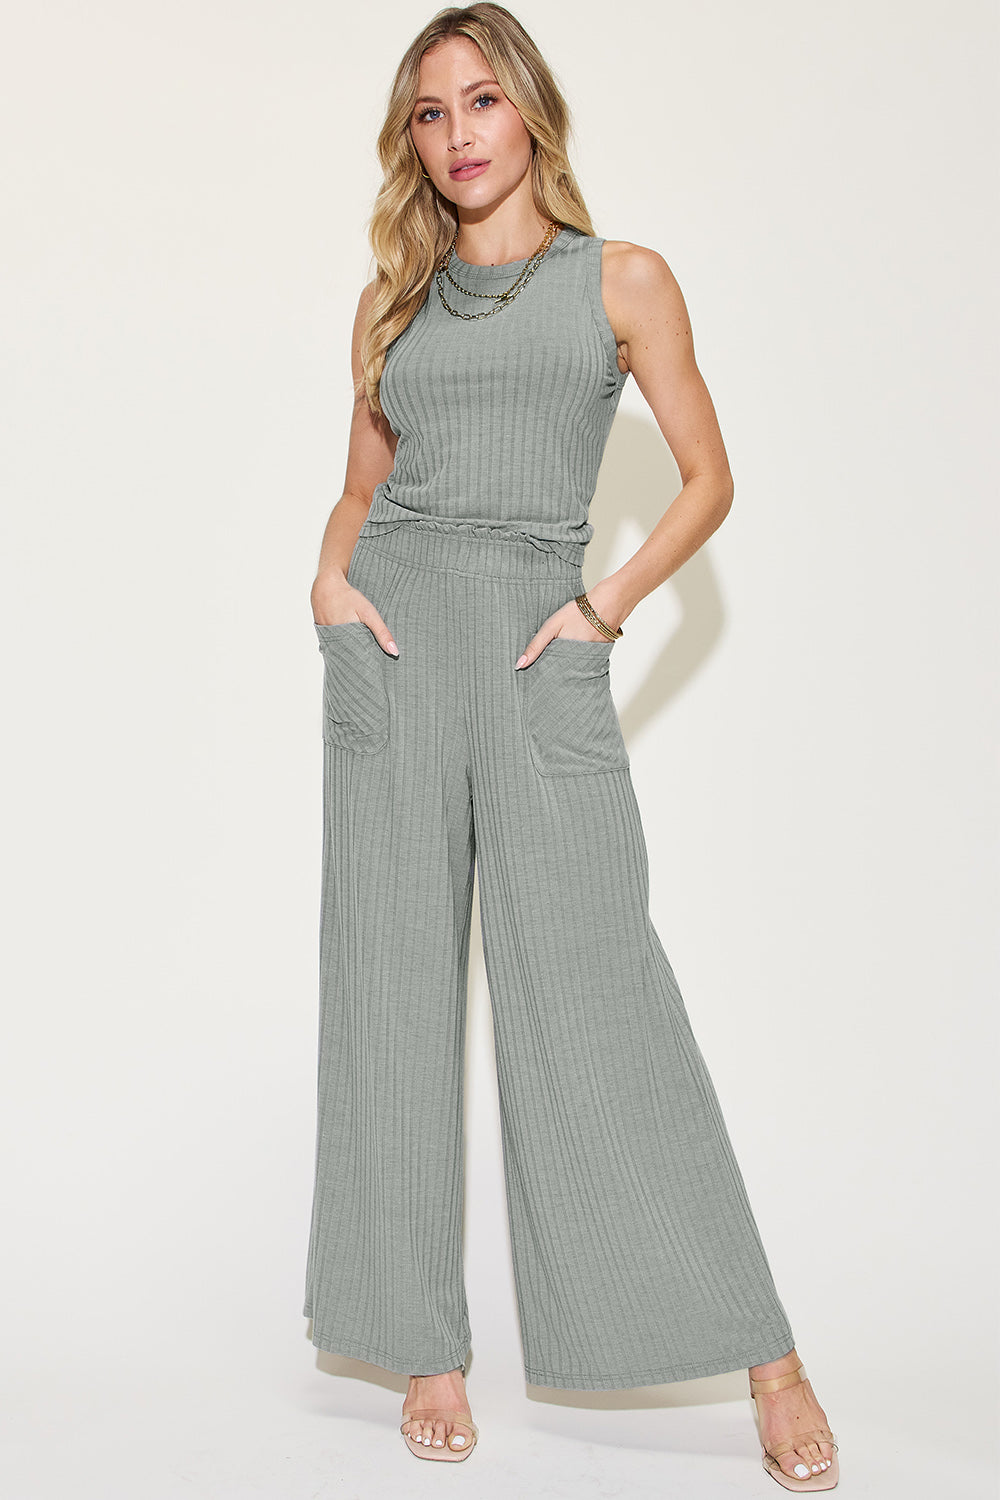 Pants, Sets, Rompers and Jumpsuits